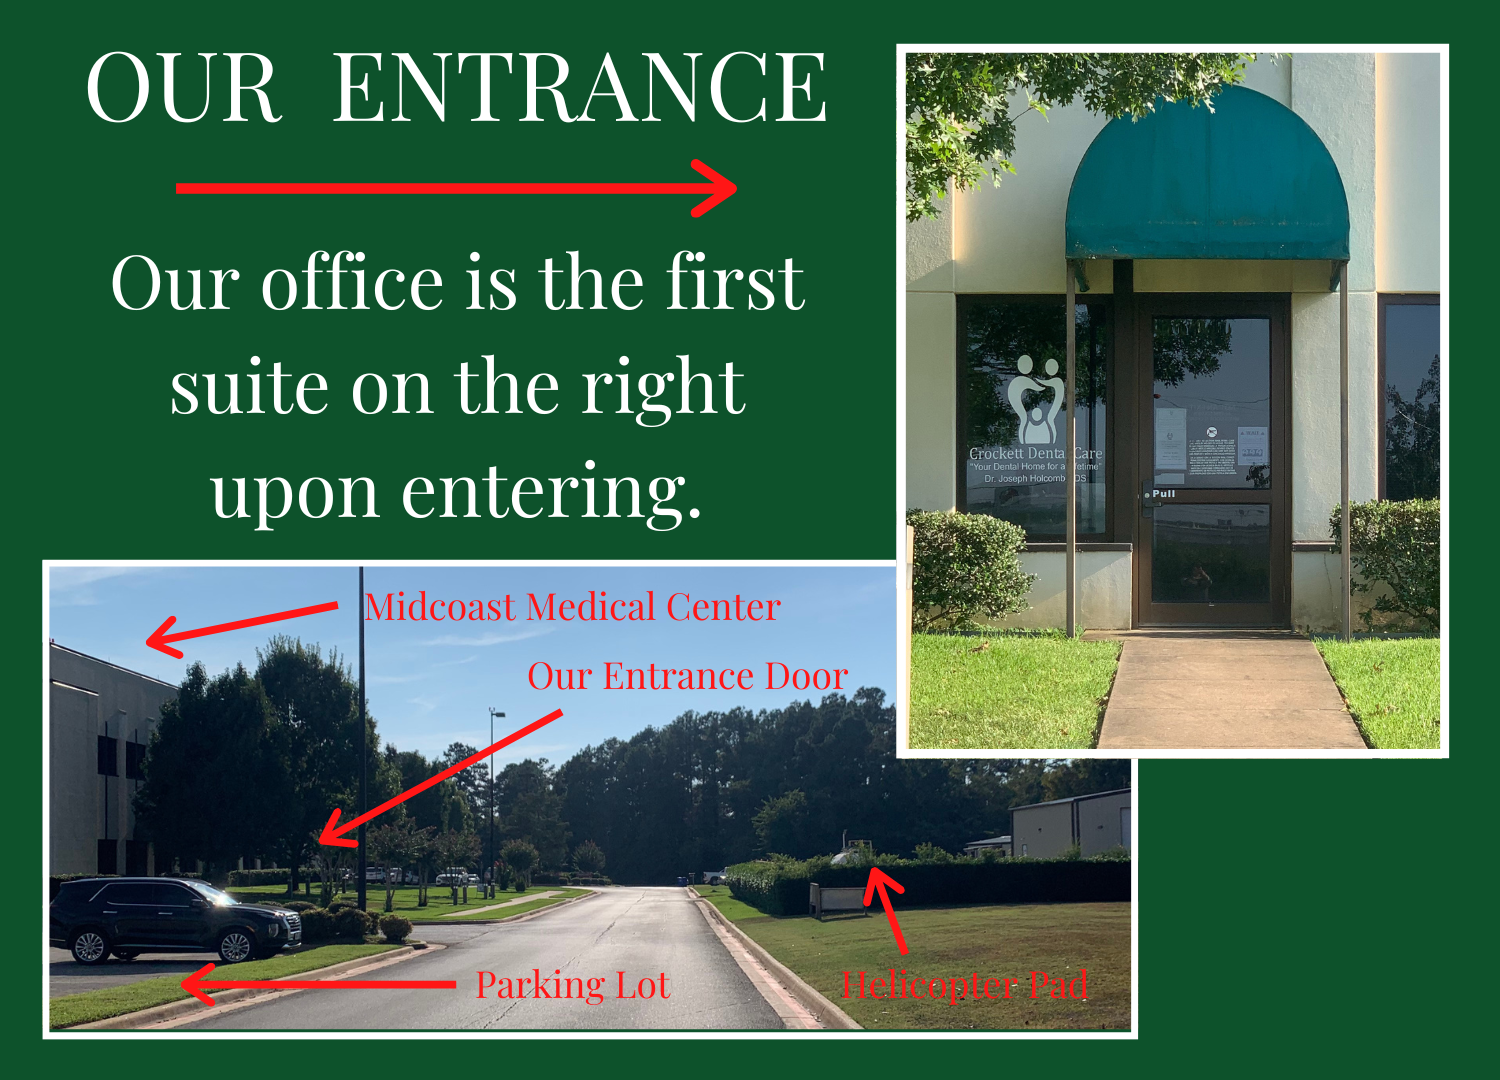 Photo depictions of where our entrance door is located.